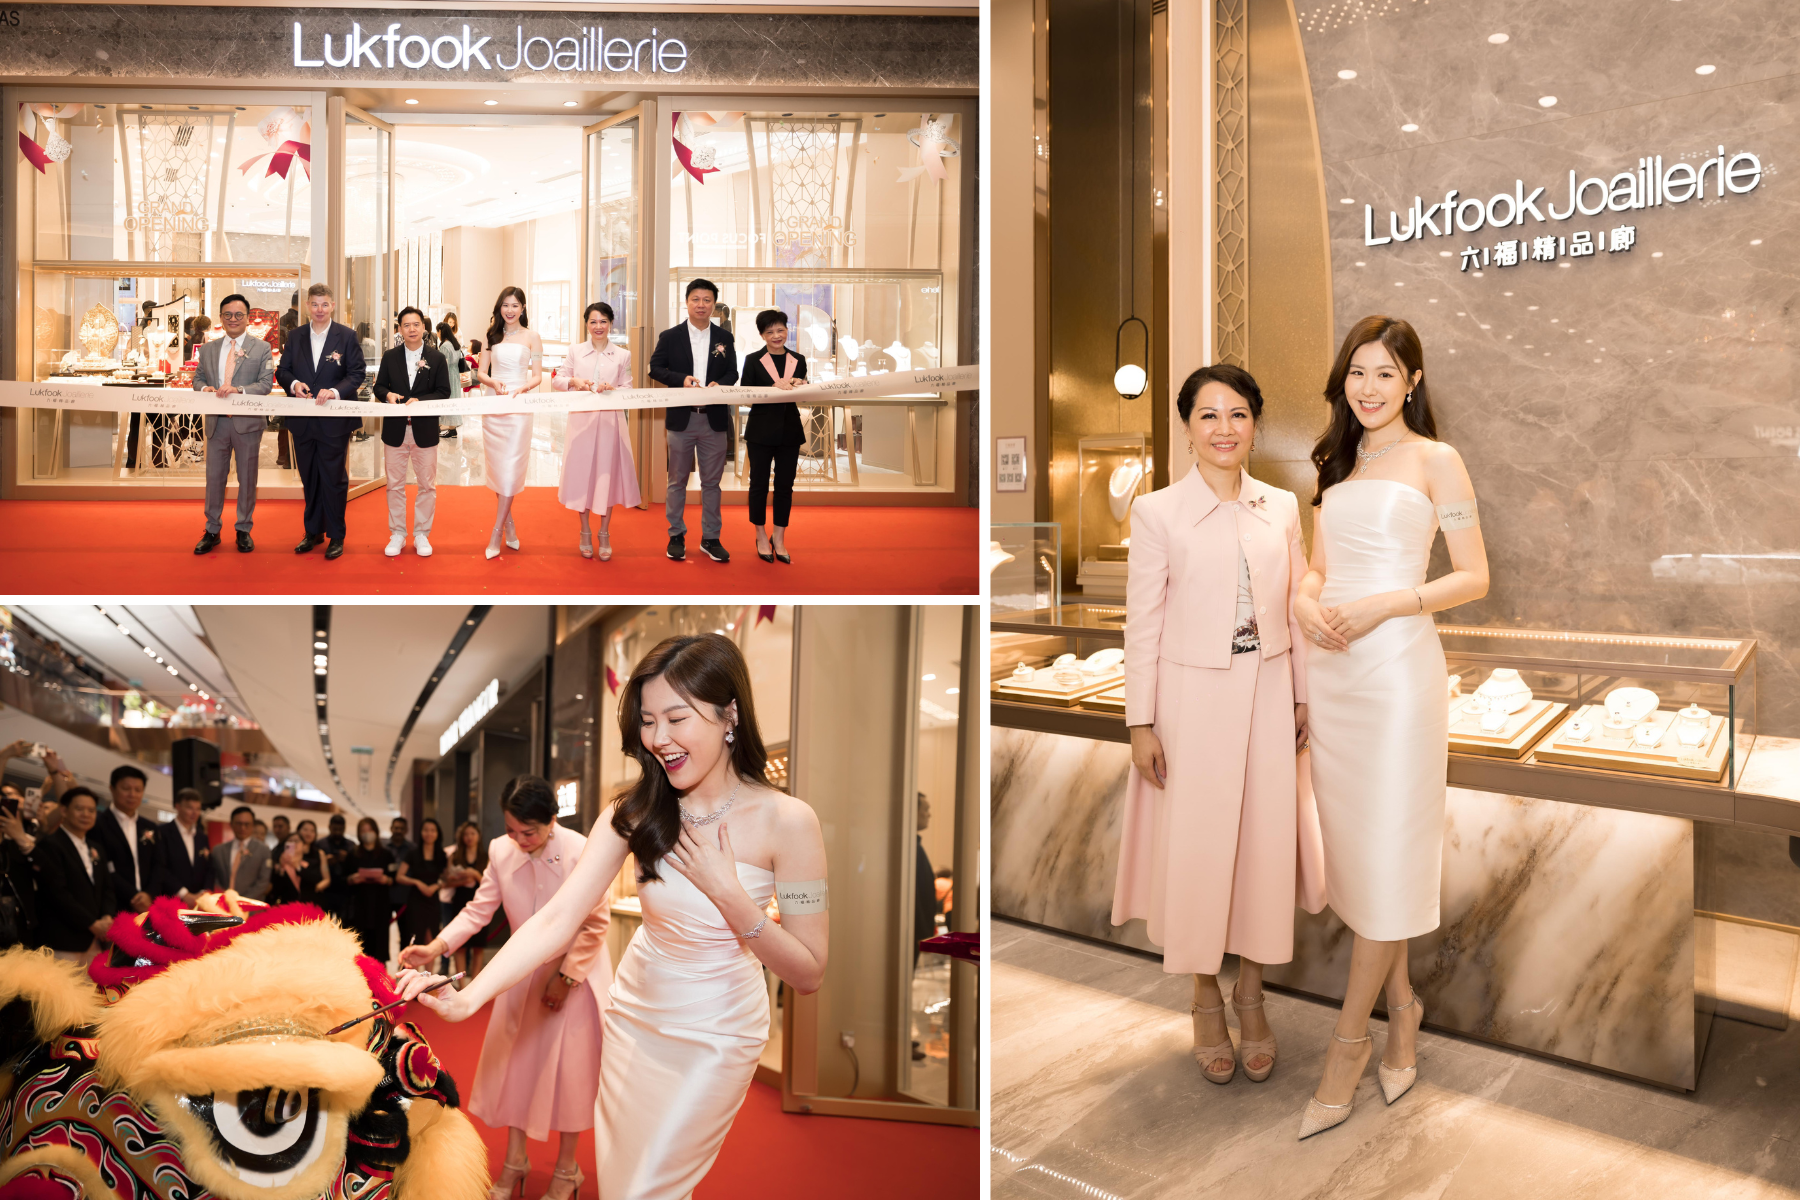 LukFook Group celebrates the grand opening of the “Lukfook Joaillerie” shop at Tun Razak Exchange (“TRX”) in Malaysia with key figures (from left to right) Mr. Darwin Cheung, Mr. Trevor Hill, Mr. Billy Cheung, Ms. Moon Lau, Ms. Shirley Wong, Mr. Chan Kah Hui and Ms. Wendy Kan.